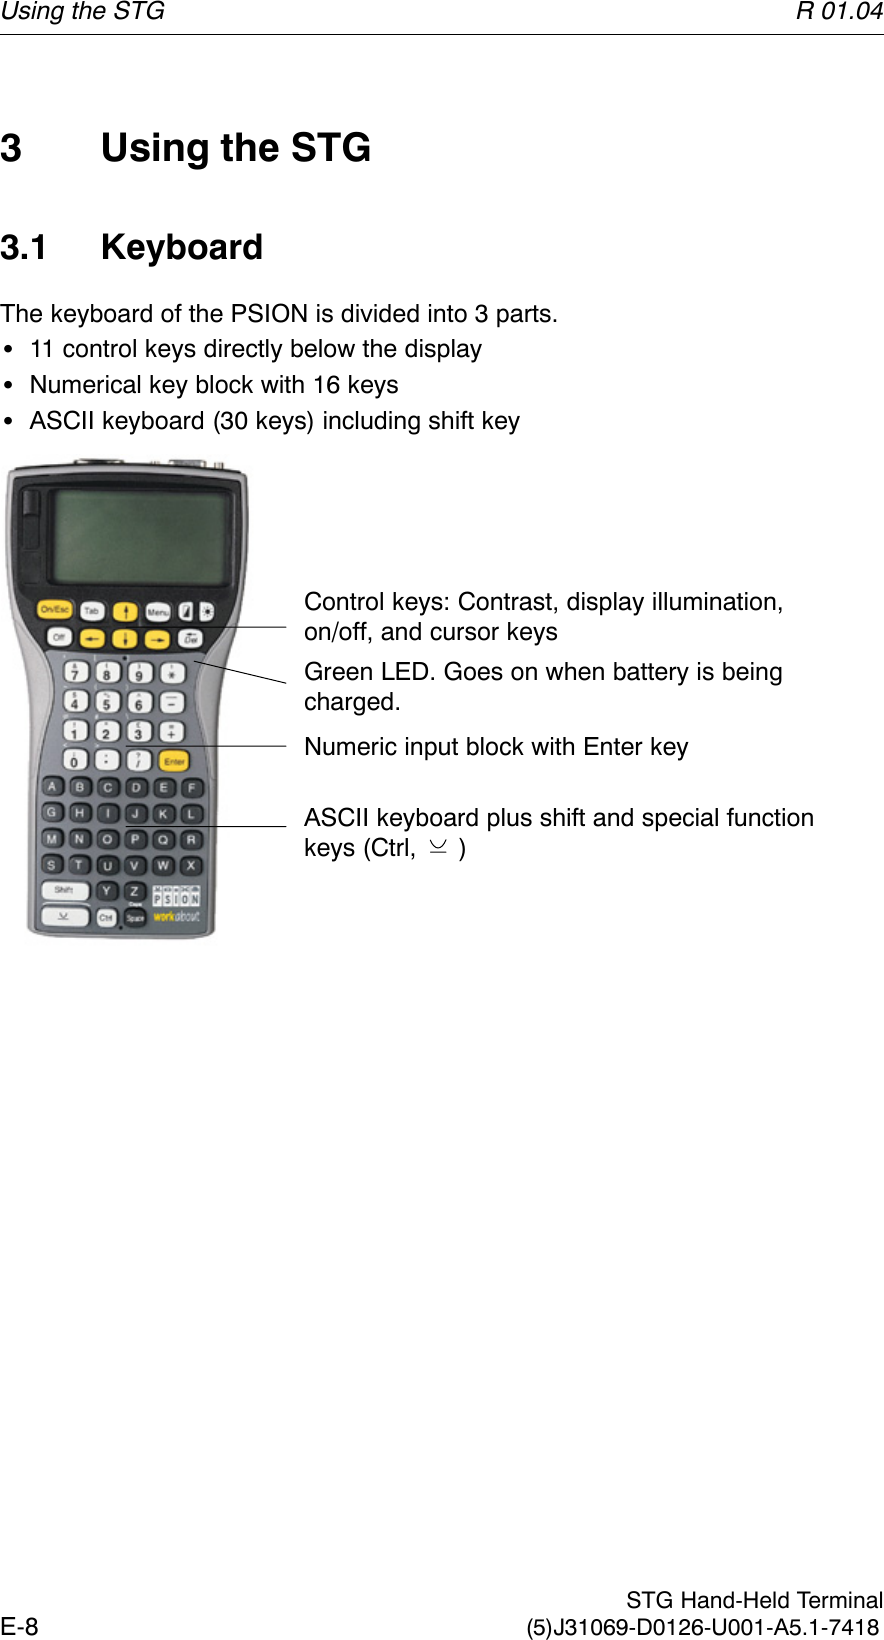 R 01.04E-8  STG Hand-Held Terminal(5)J31069-D0126-U001-A5.1-74183 Using the STG3.1 KeyboardThe keyboard of the PSION is divided into 3 parts.S11 control keys directly below the displaySNumerical key block with 16 keysSASCII keyboard (30 keys) including shift keyASCII keyboard plus shift and special functionkeys (Ctrl,      )Control keys: Contrast, display illumination,on/off, and cursor keysNumeric input block with Enter keyGreen LED. Goes on when battery is beingcharged.Using the STG